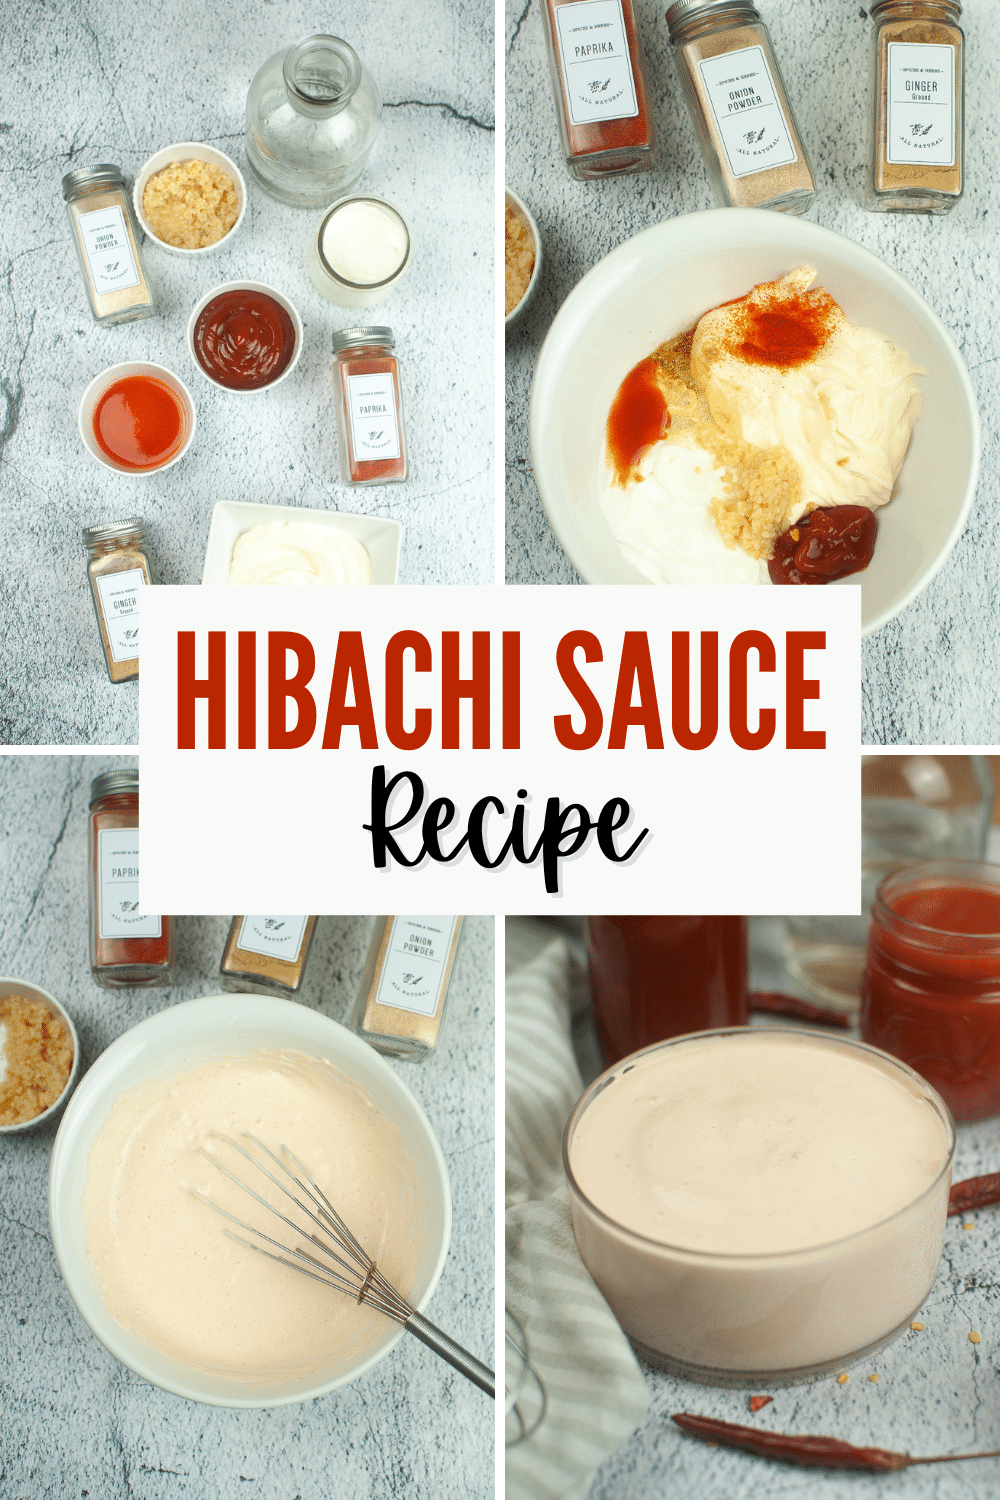 Experience restaurant-quality sauce with this homemade hibachi sauce recipe, which harmoniously blends creaminess and satisfying tanginess. #hibachisaucerecipe #hibachi #yumyumsauce #hibachisauce #dippingsauce via @wondermomwannab